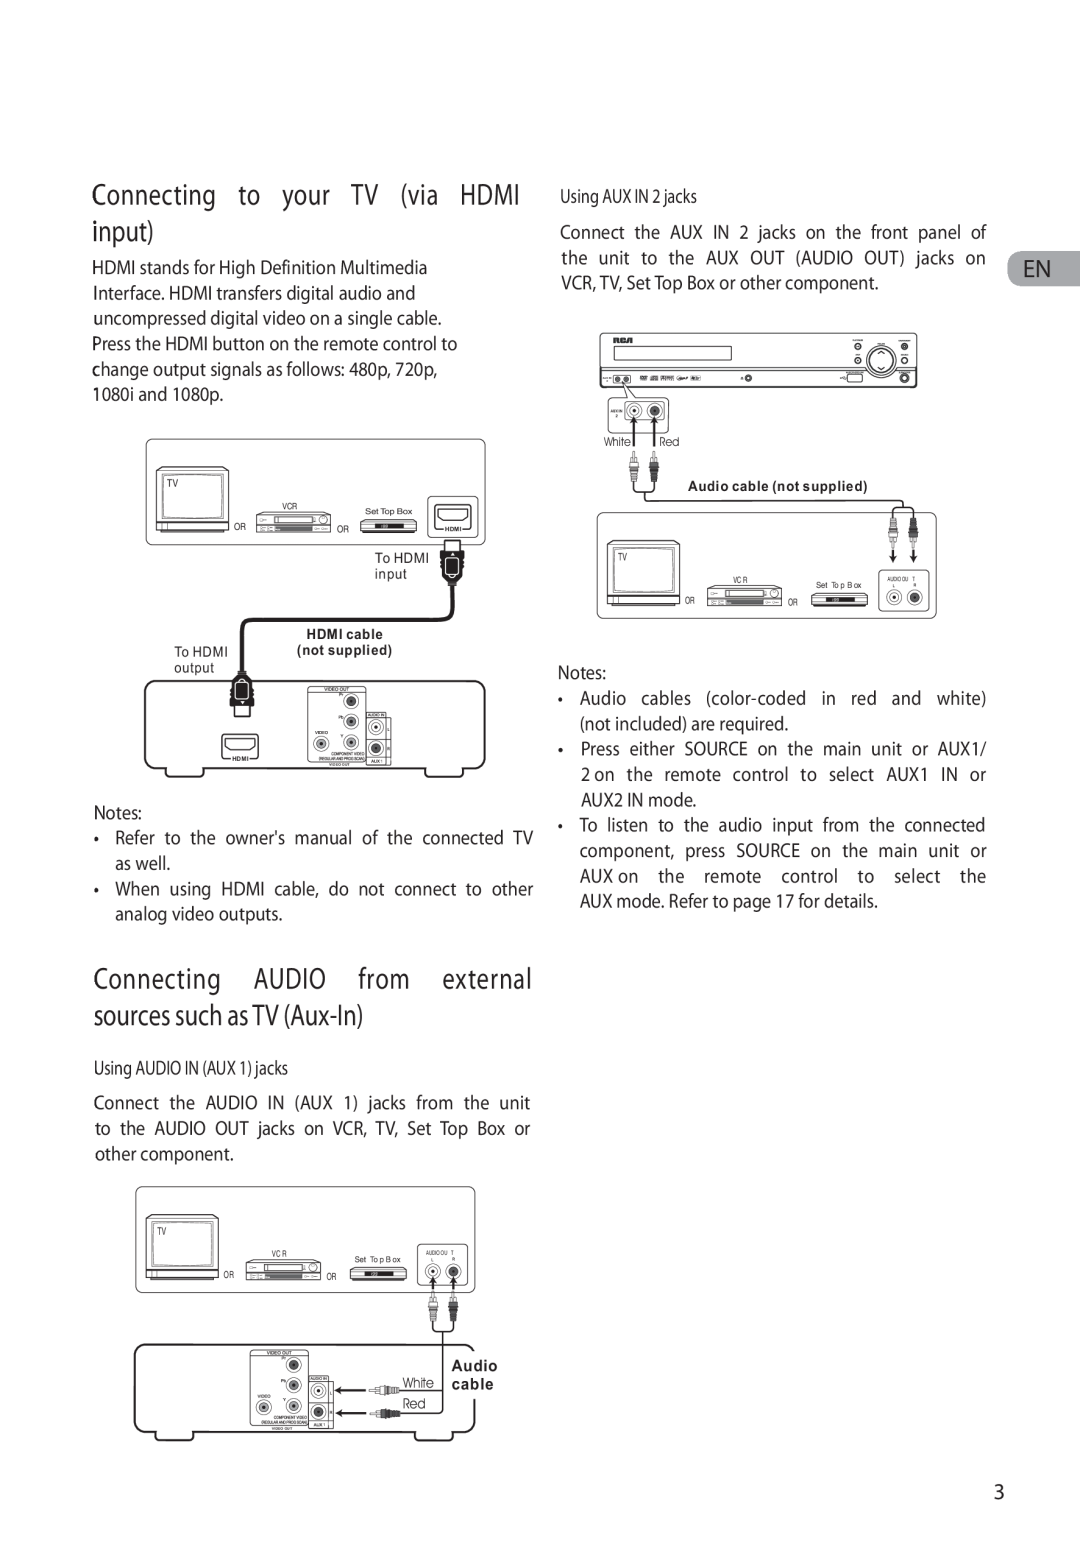 RCA RTD317 user manual Connecting to your TV via HDMI input 